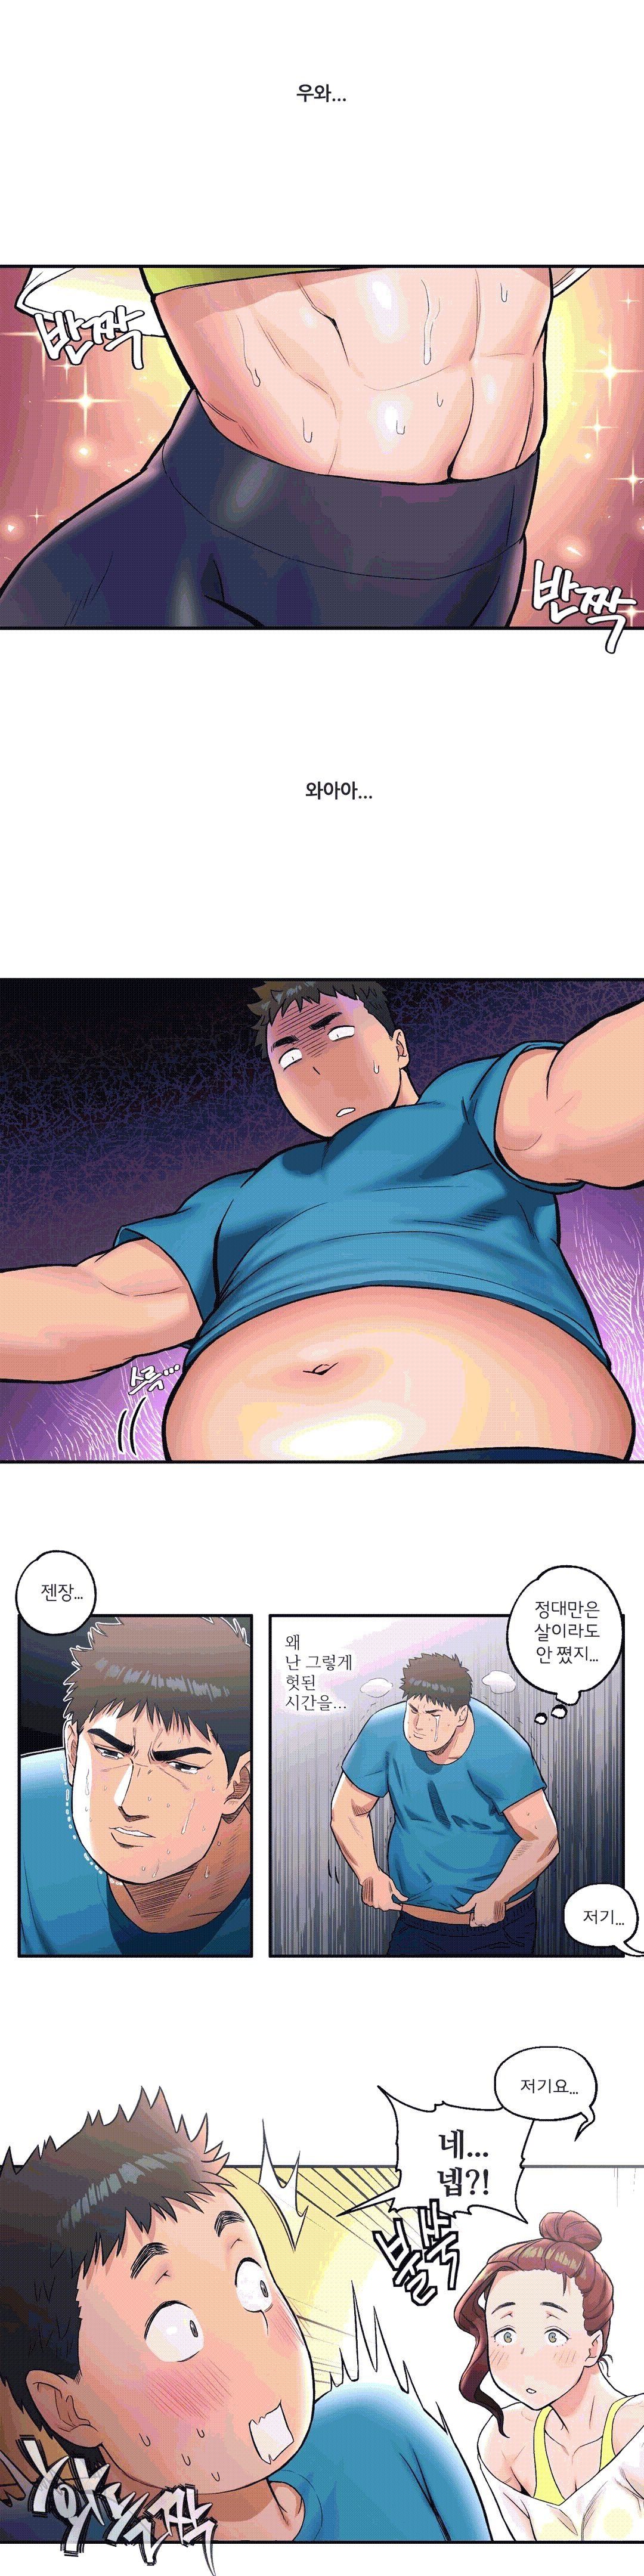 Sexercise Raw - Chapter 19 Page 13